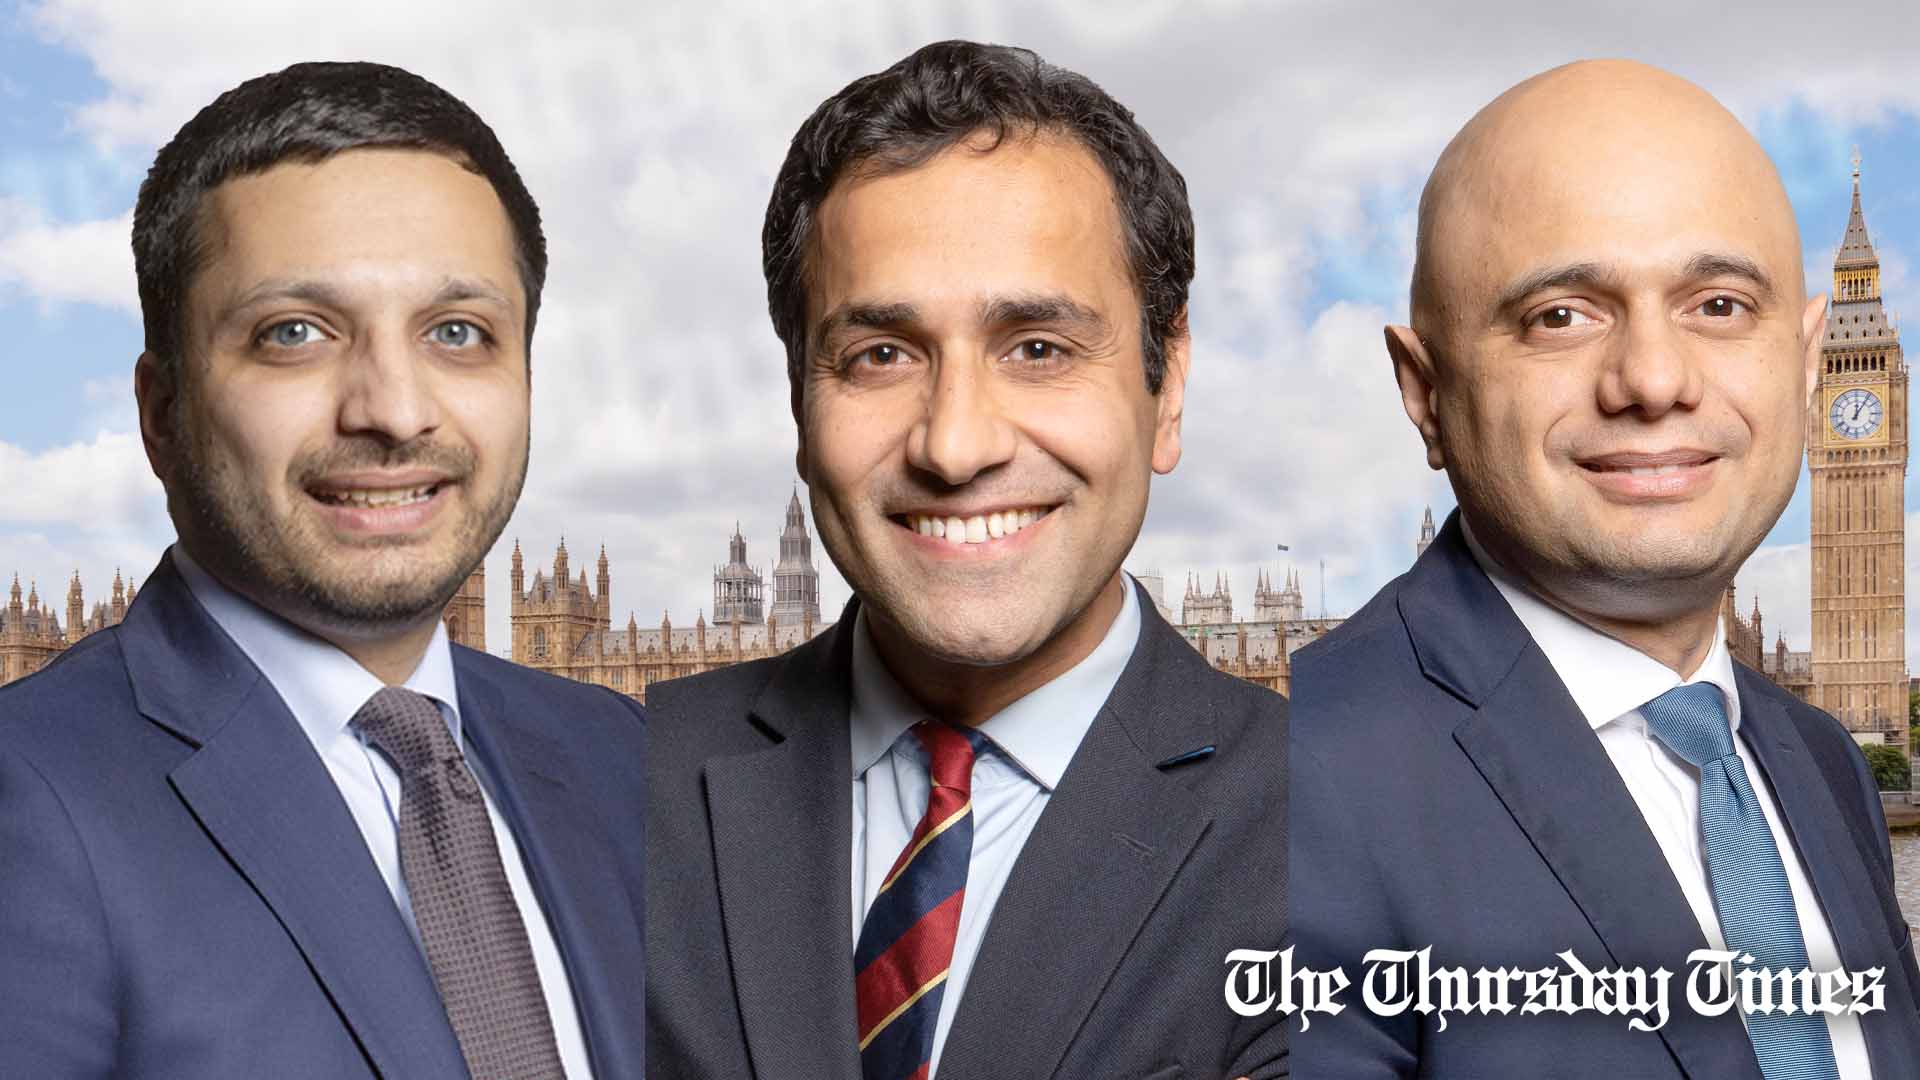 A combined file photo is shown of Conservative MPs, from L to R, Saqib Bhatti, Rehman Chishti, and Sajid Javid. — FILE/THE THURSDAY TIMES